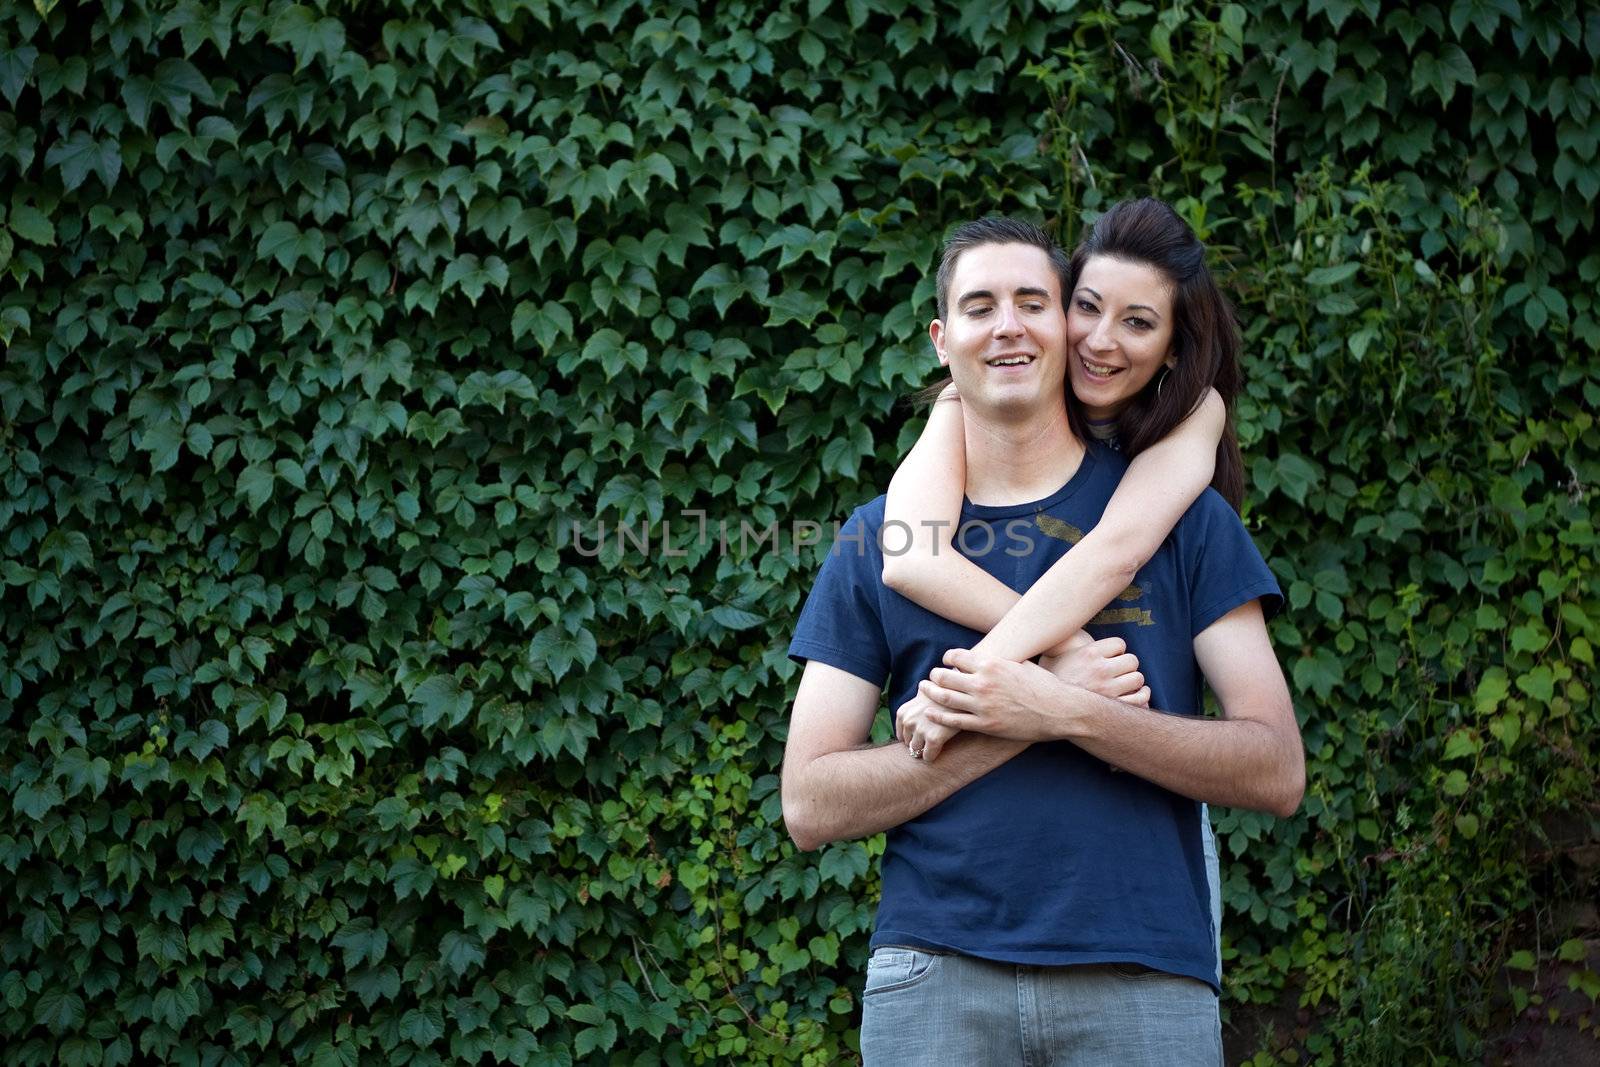 A happy young couple in their mid 20s together outdoors in front of some green ivy.